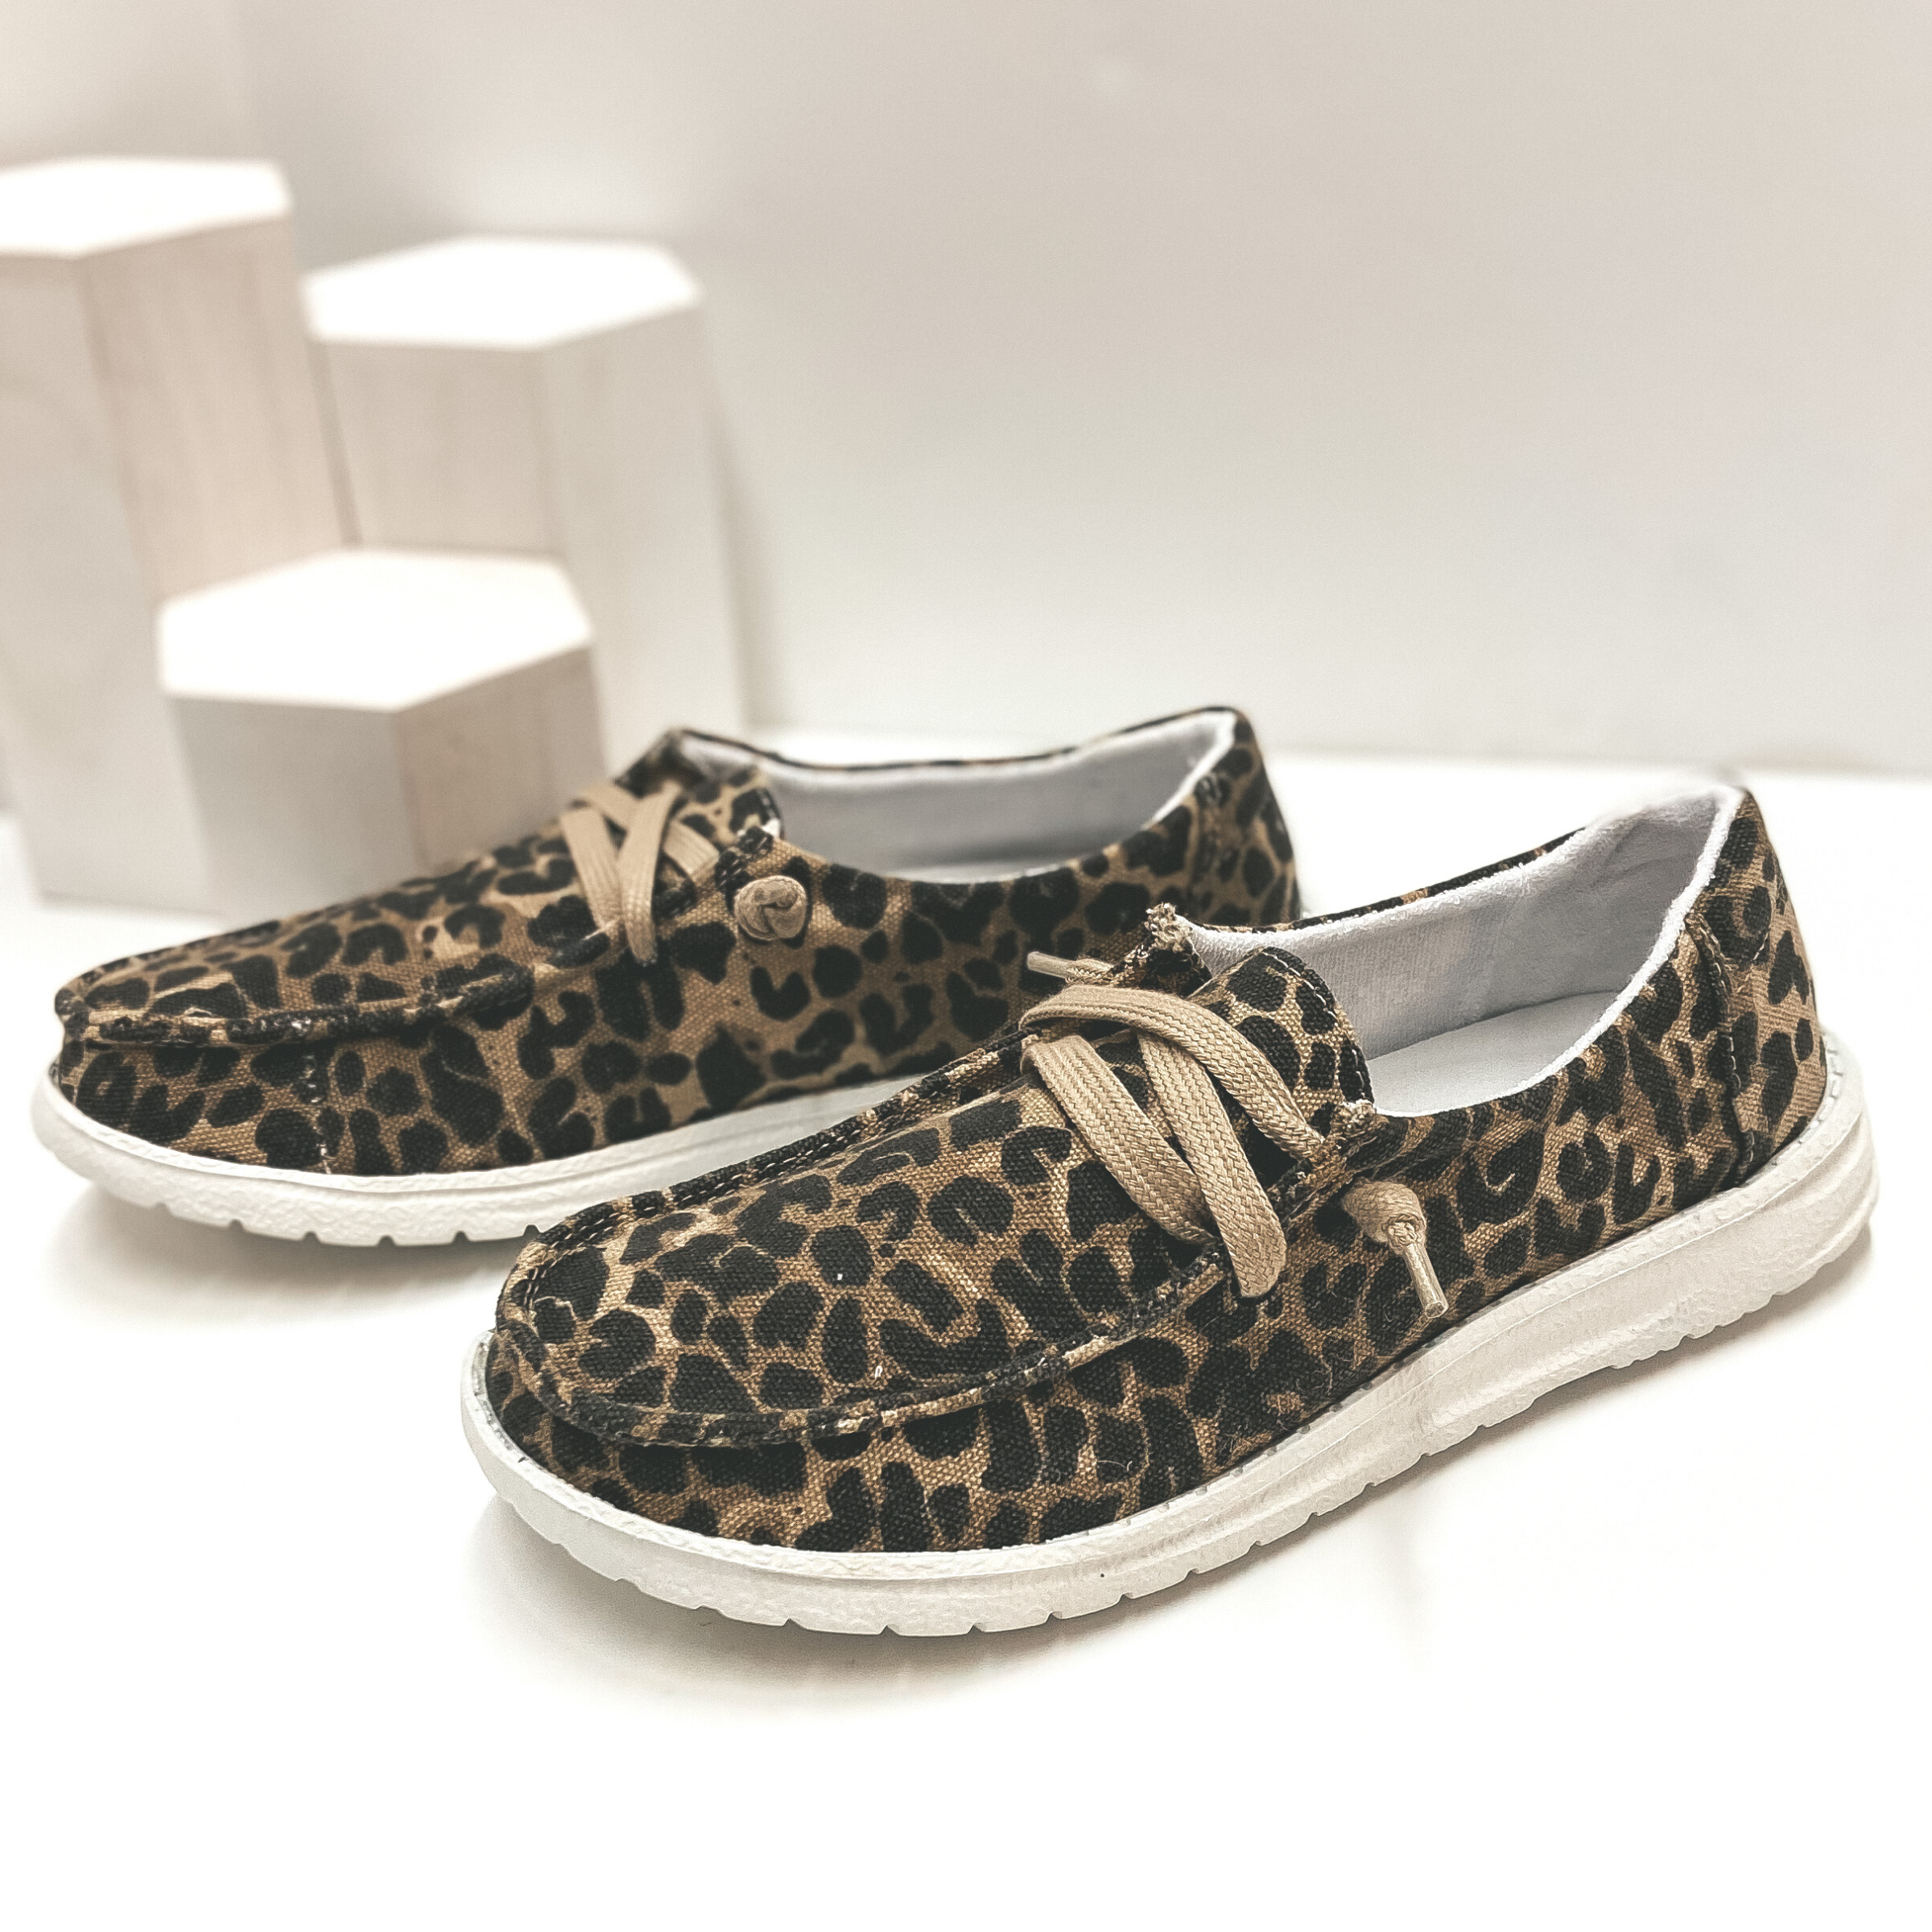 Leopard print slip on loafers with a taupe colored shoe lace and white sole. Pictured on white background.